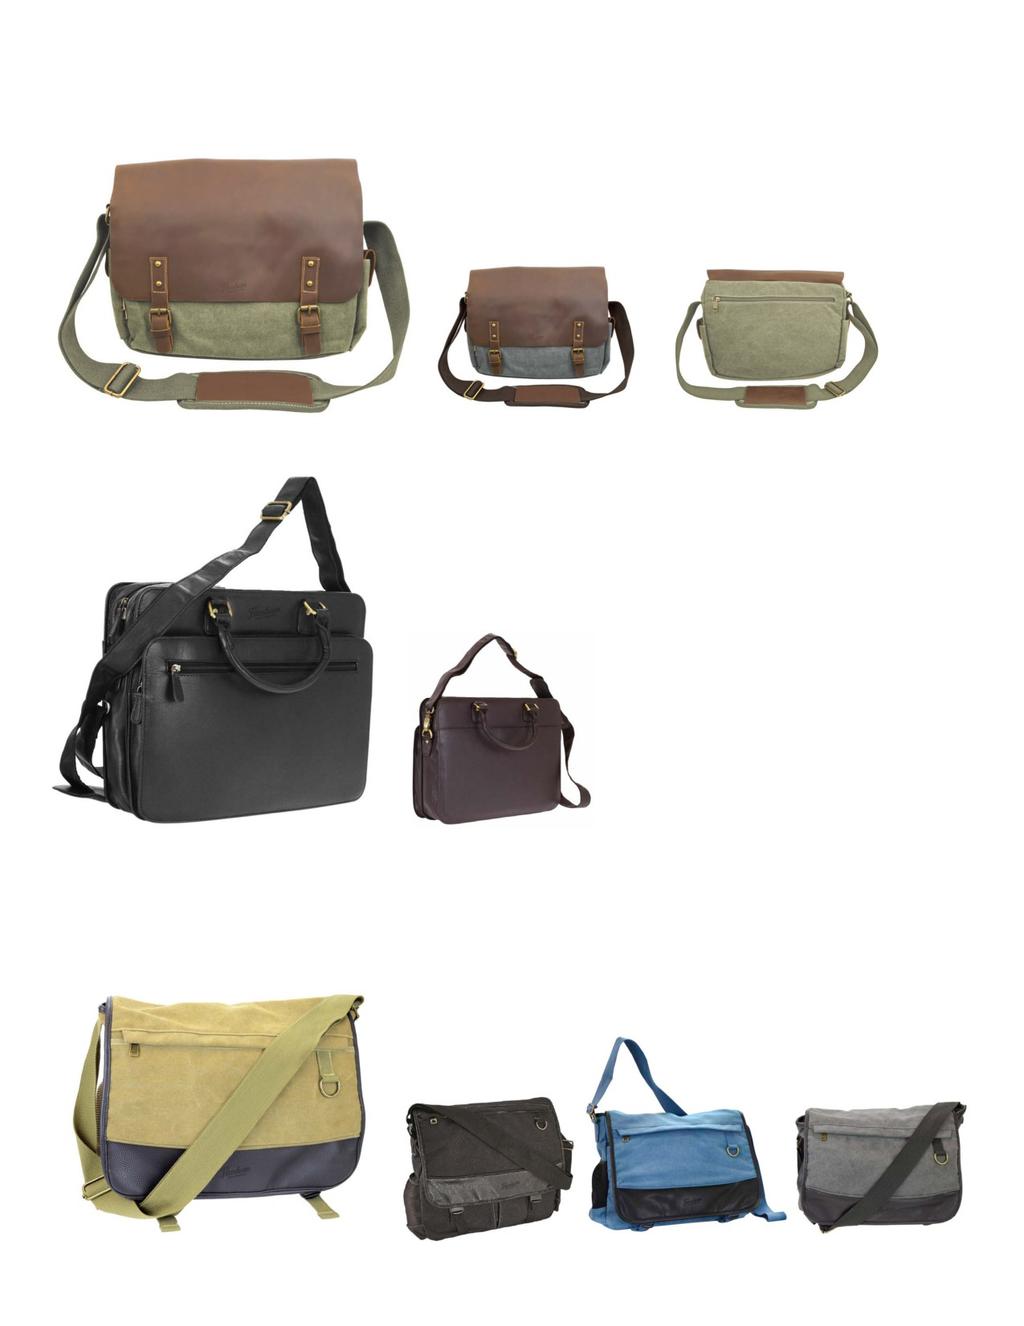 FL#4-510-2Z Canvas messenger bag with leather flap and accents.